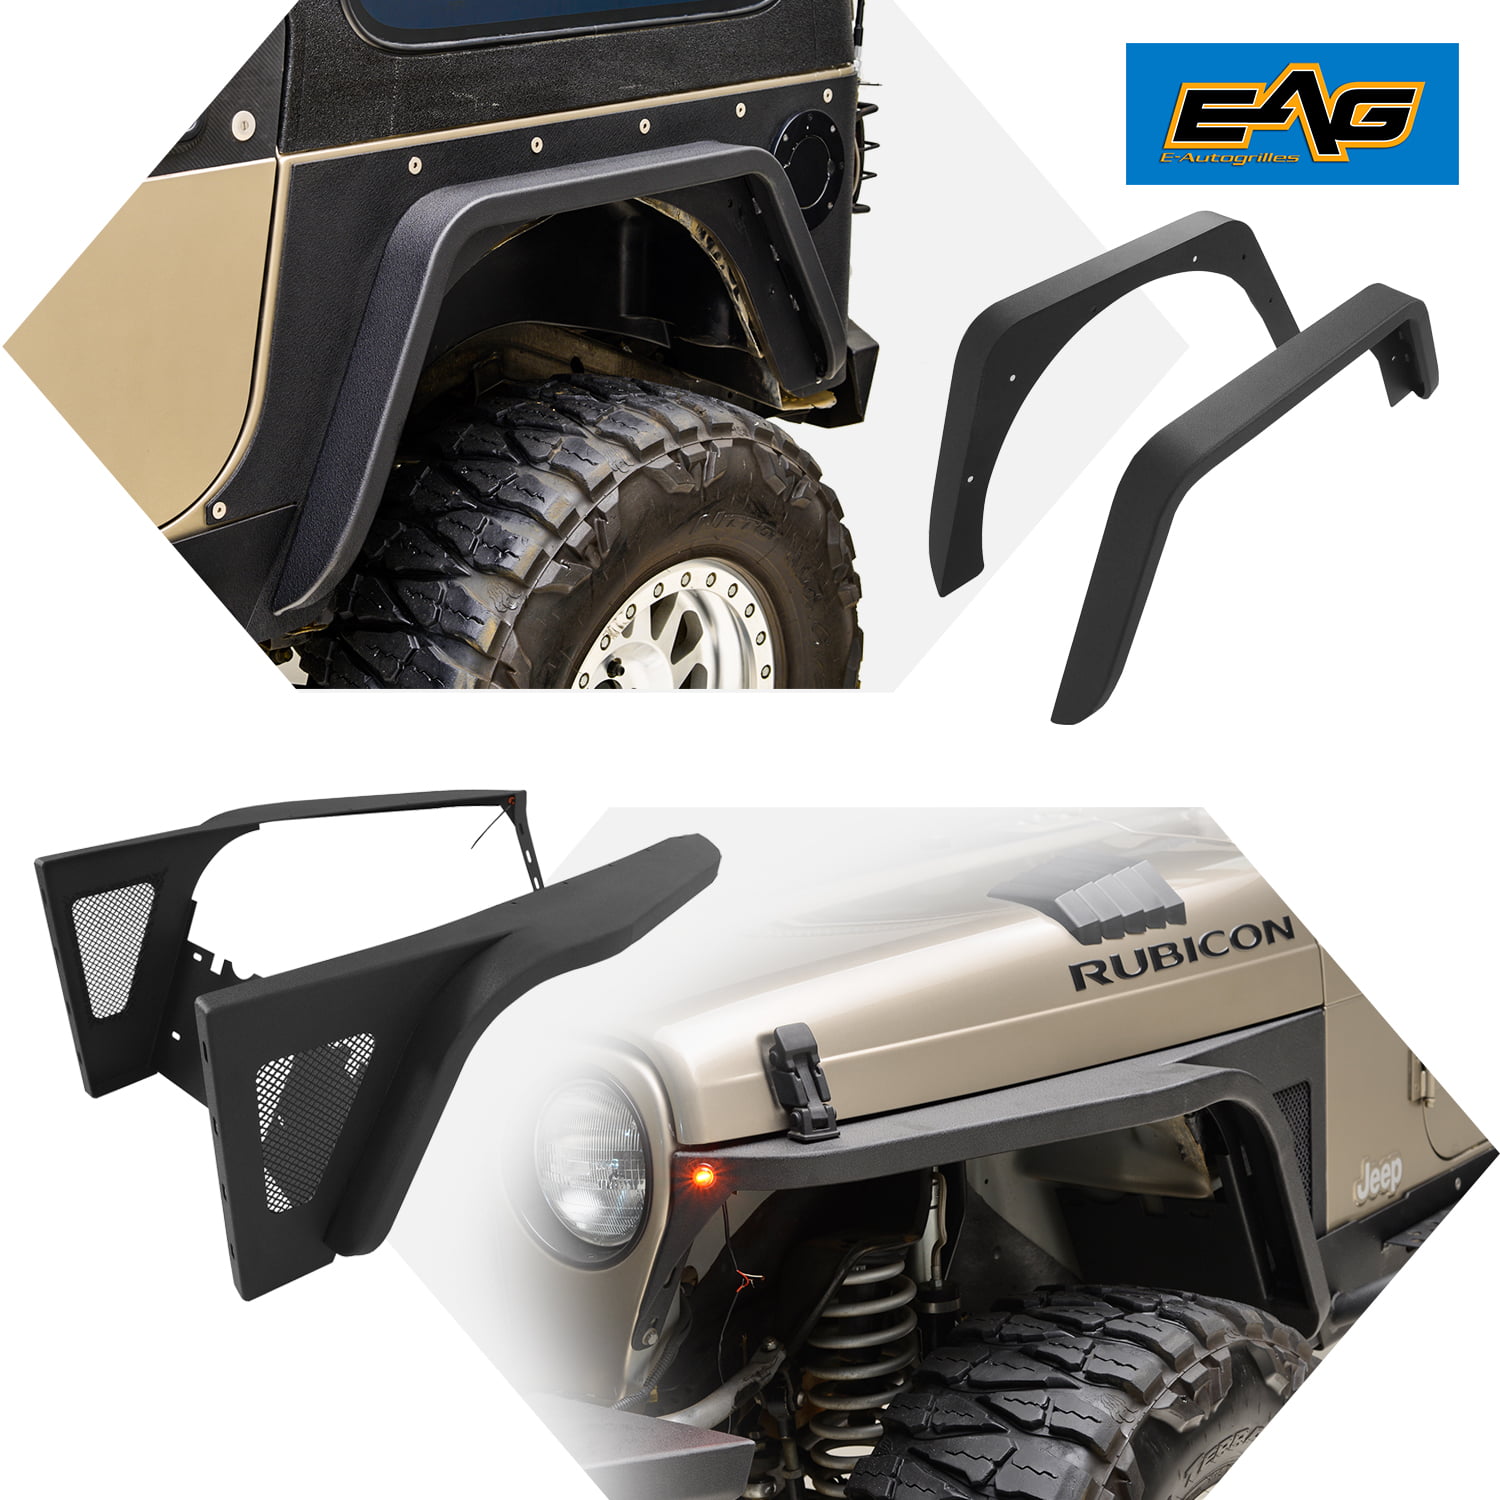 EAG Front and Rear Fender Flares Fit for 97-06 Wrangler TJ Replacement  Rocker Guards 